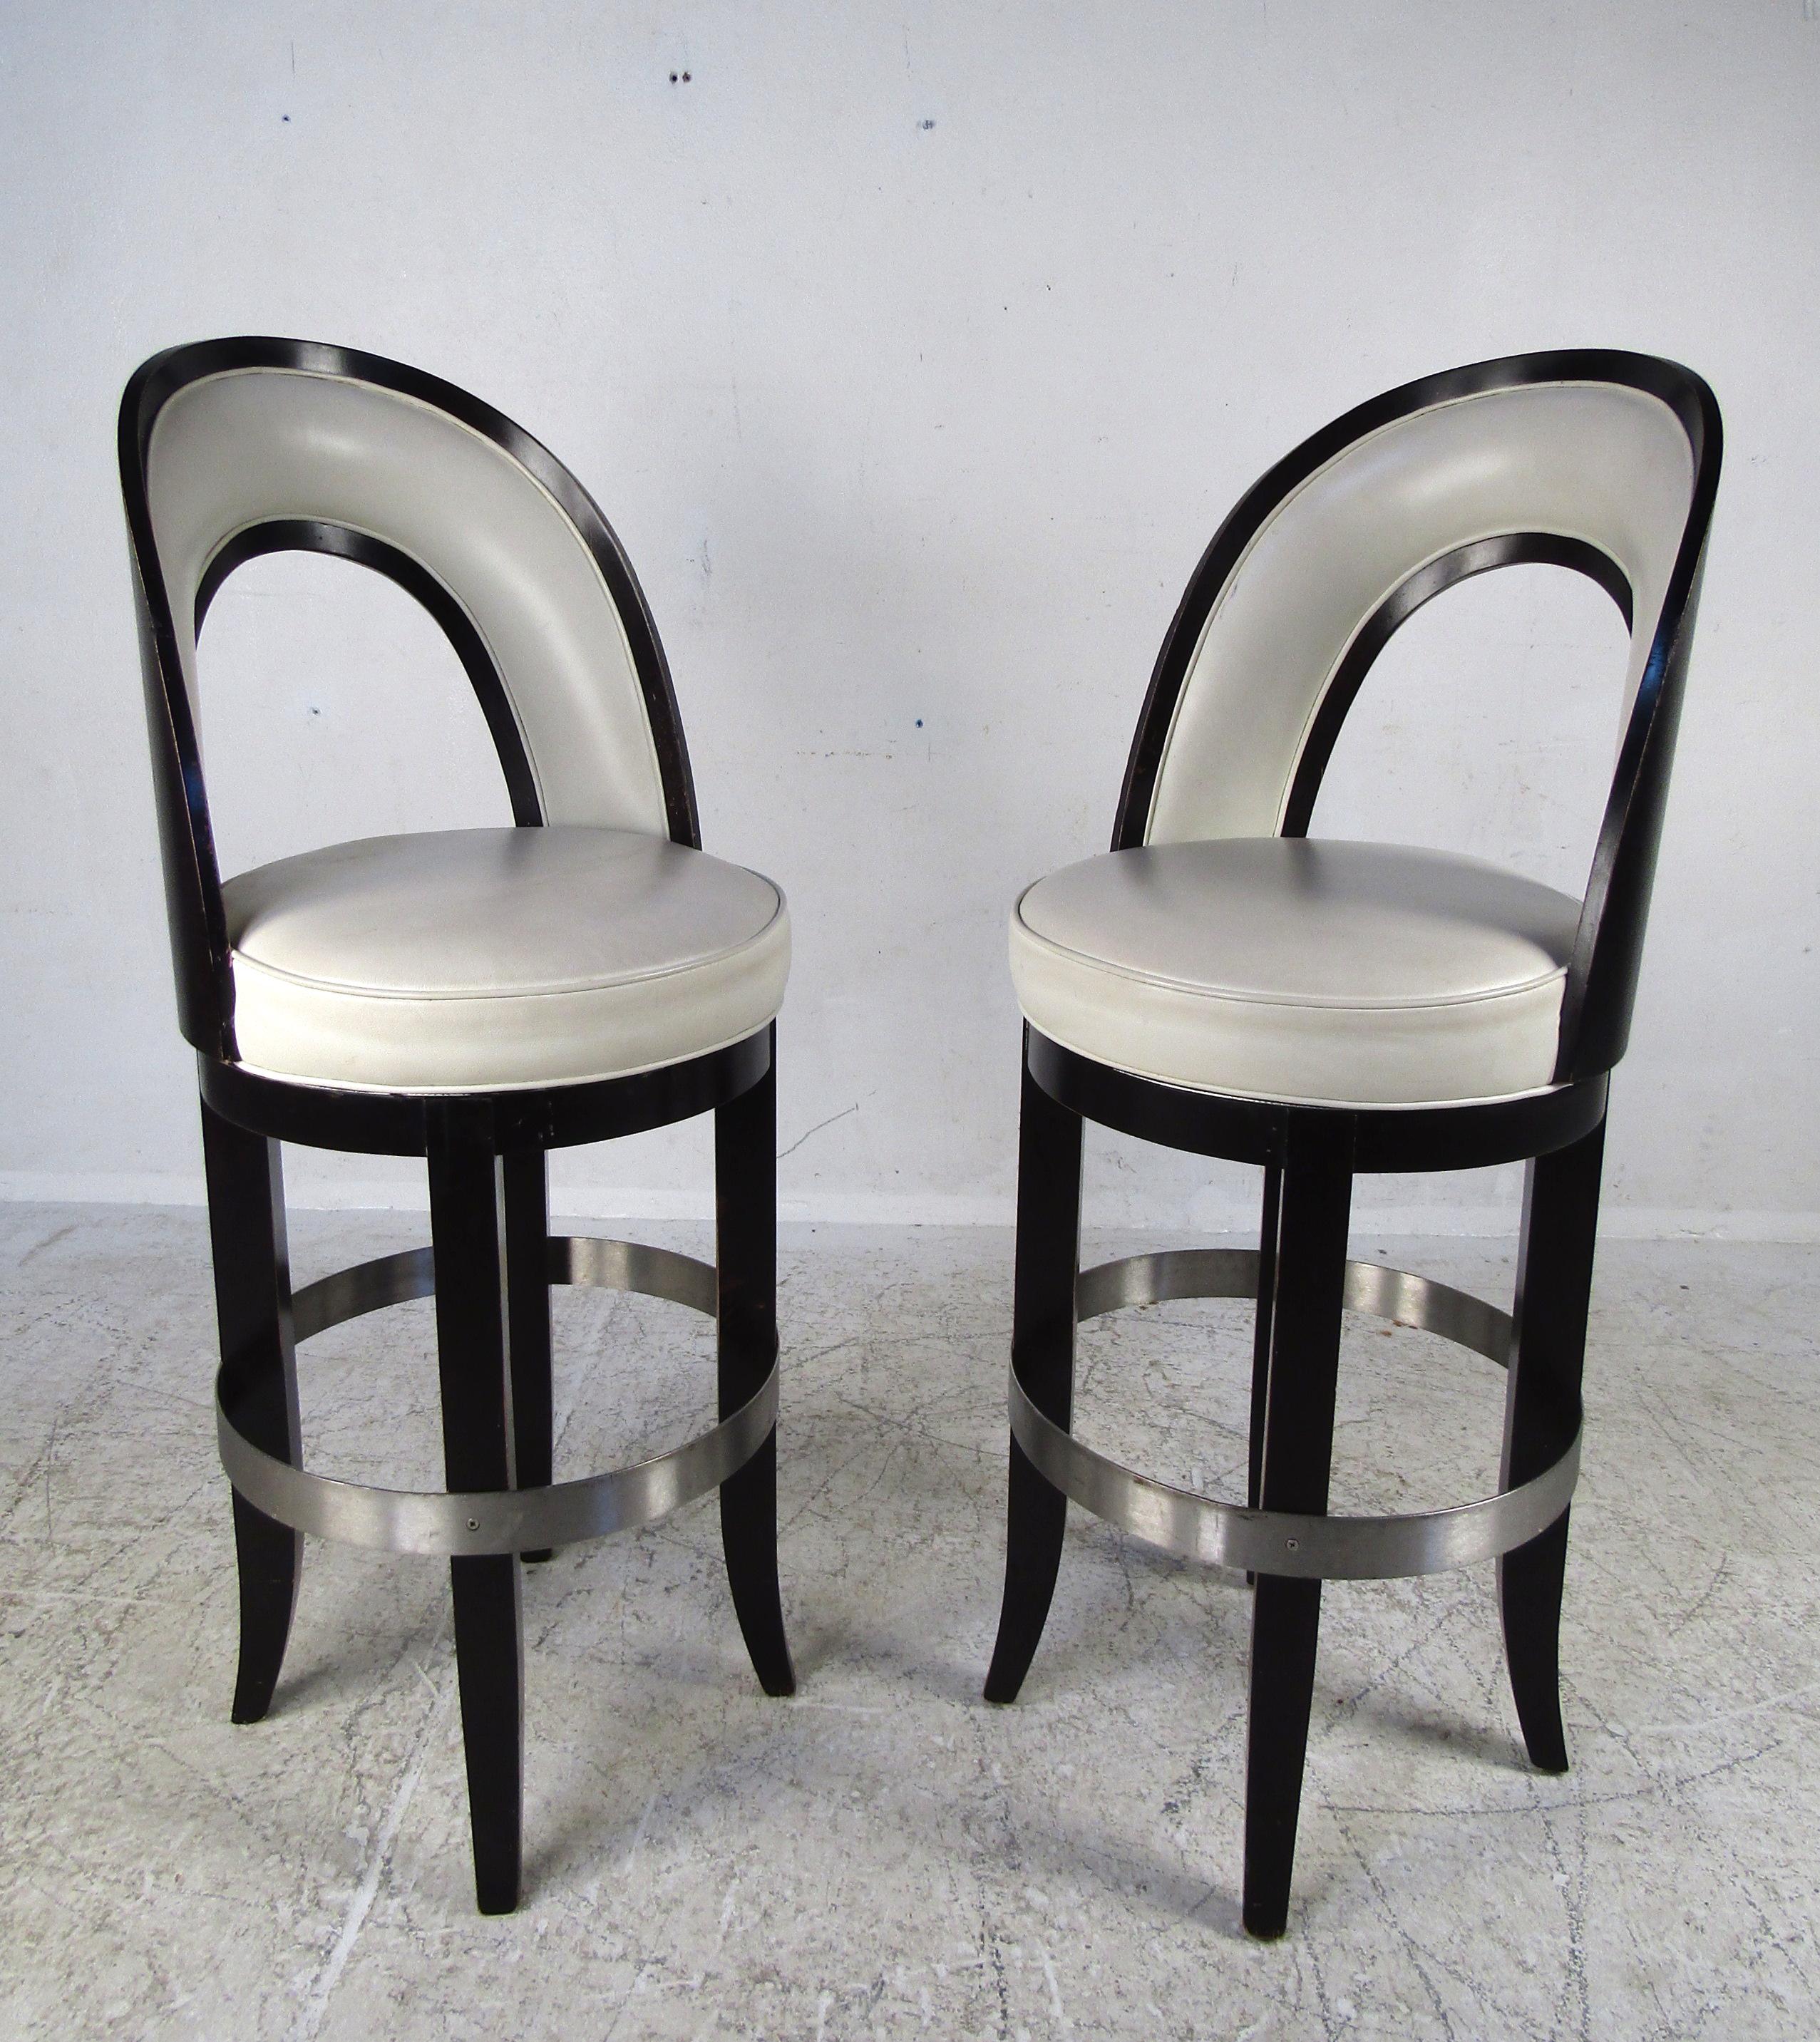 Set of Four Mid-Century Modern Italian Swivel Bar Stools In Good Condition For Sale In Brooklyn, NY